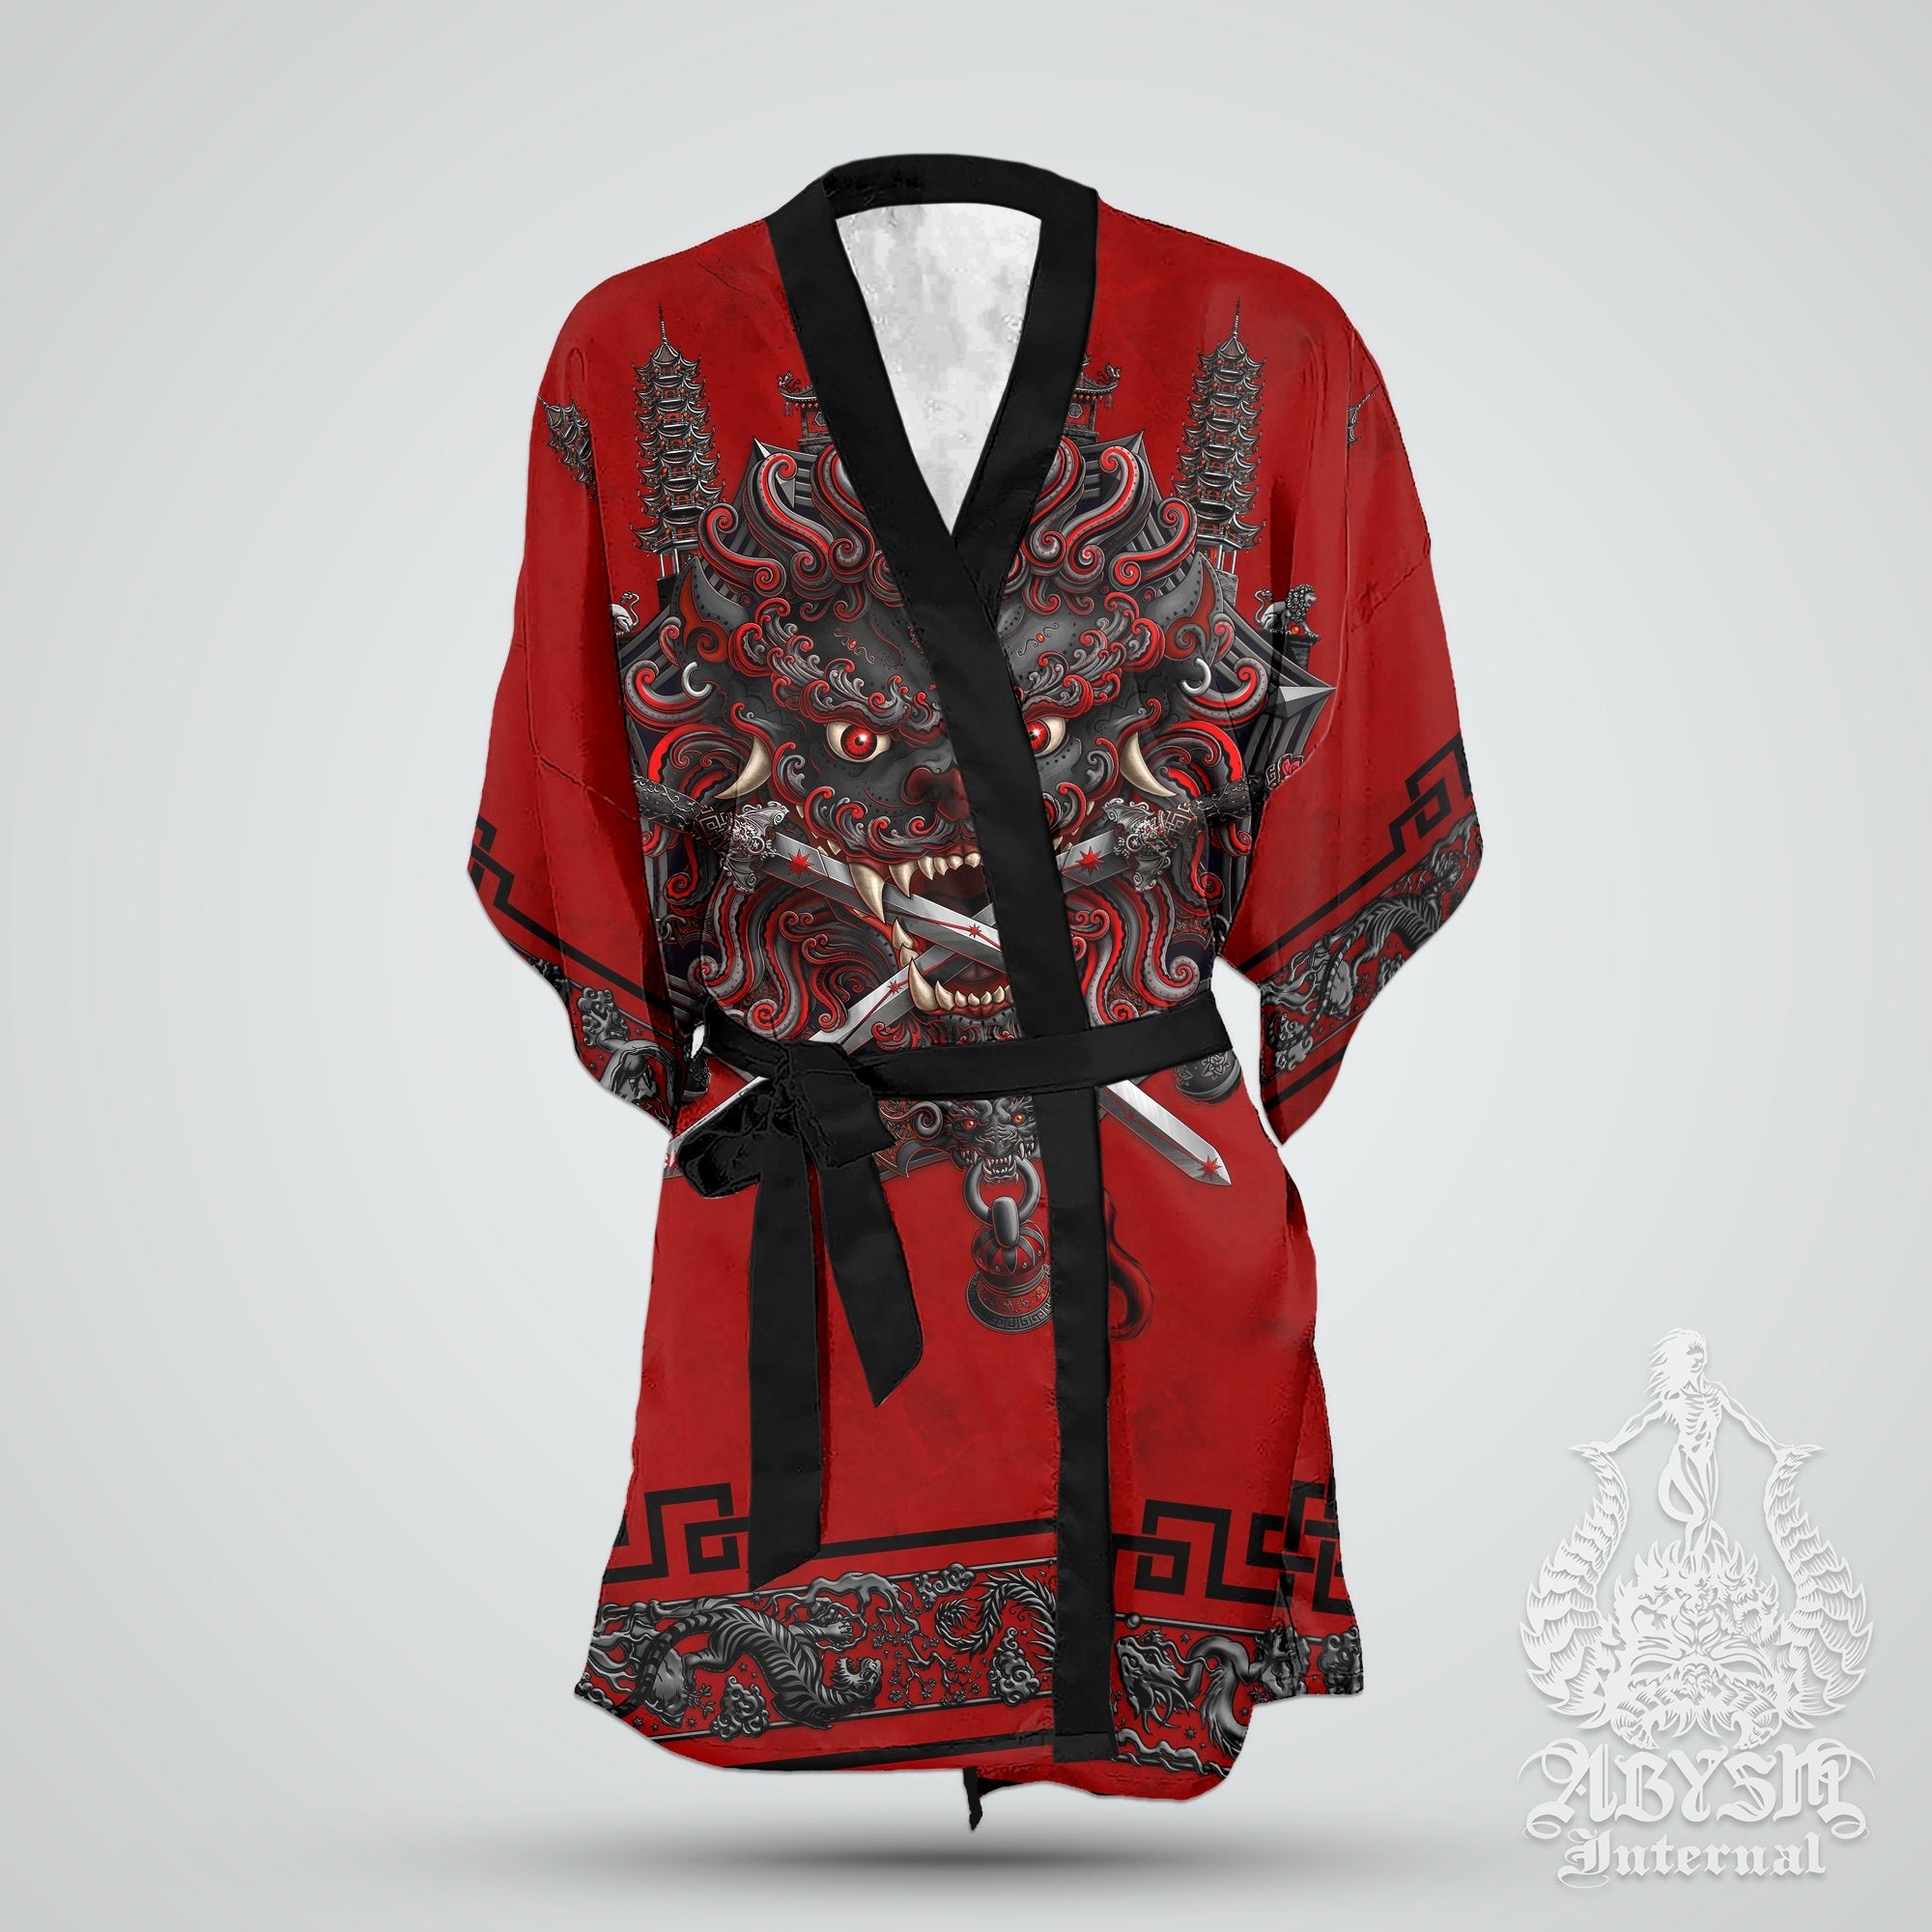 Sword Lion Cover Up, Beach Outfit, Chinese Party Kimono, Taiwan Summer Festival Robe, Asian Indie and Alternative Clothing, Unisex - Gothic - Abysm Internal